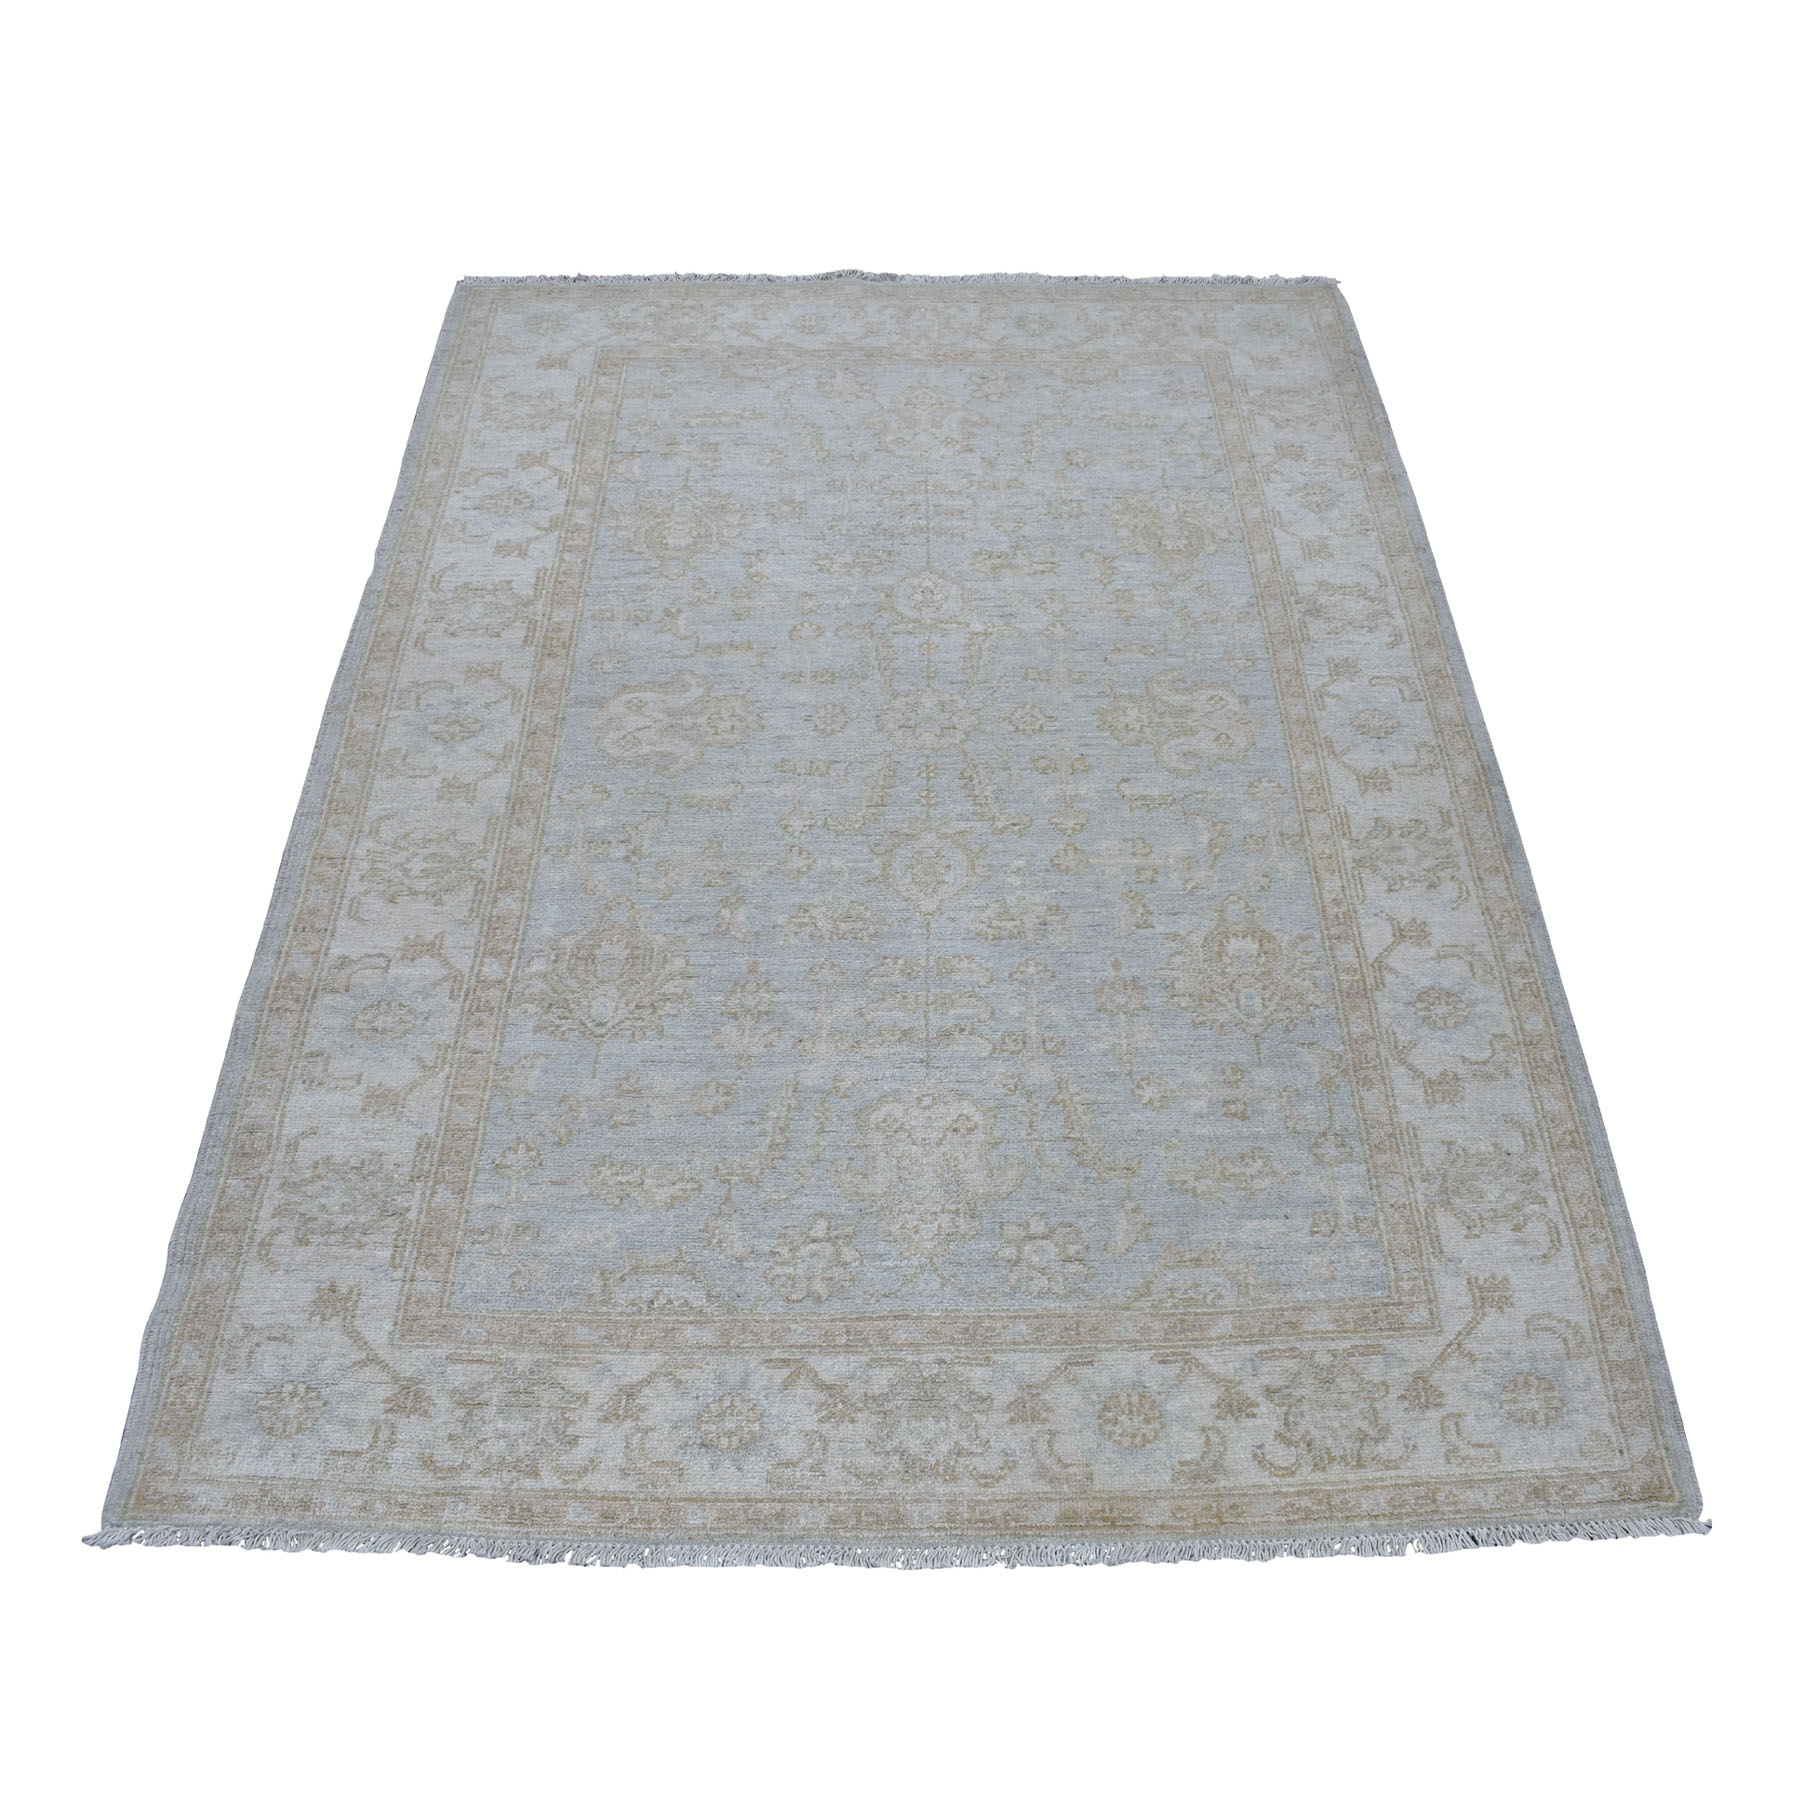 4'2"X6' White Wash Peshawar Mahal Design Pure Wool Hand Knotted Oriental Rug moaec9e8